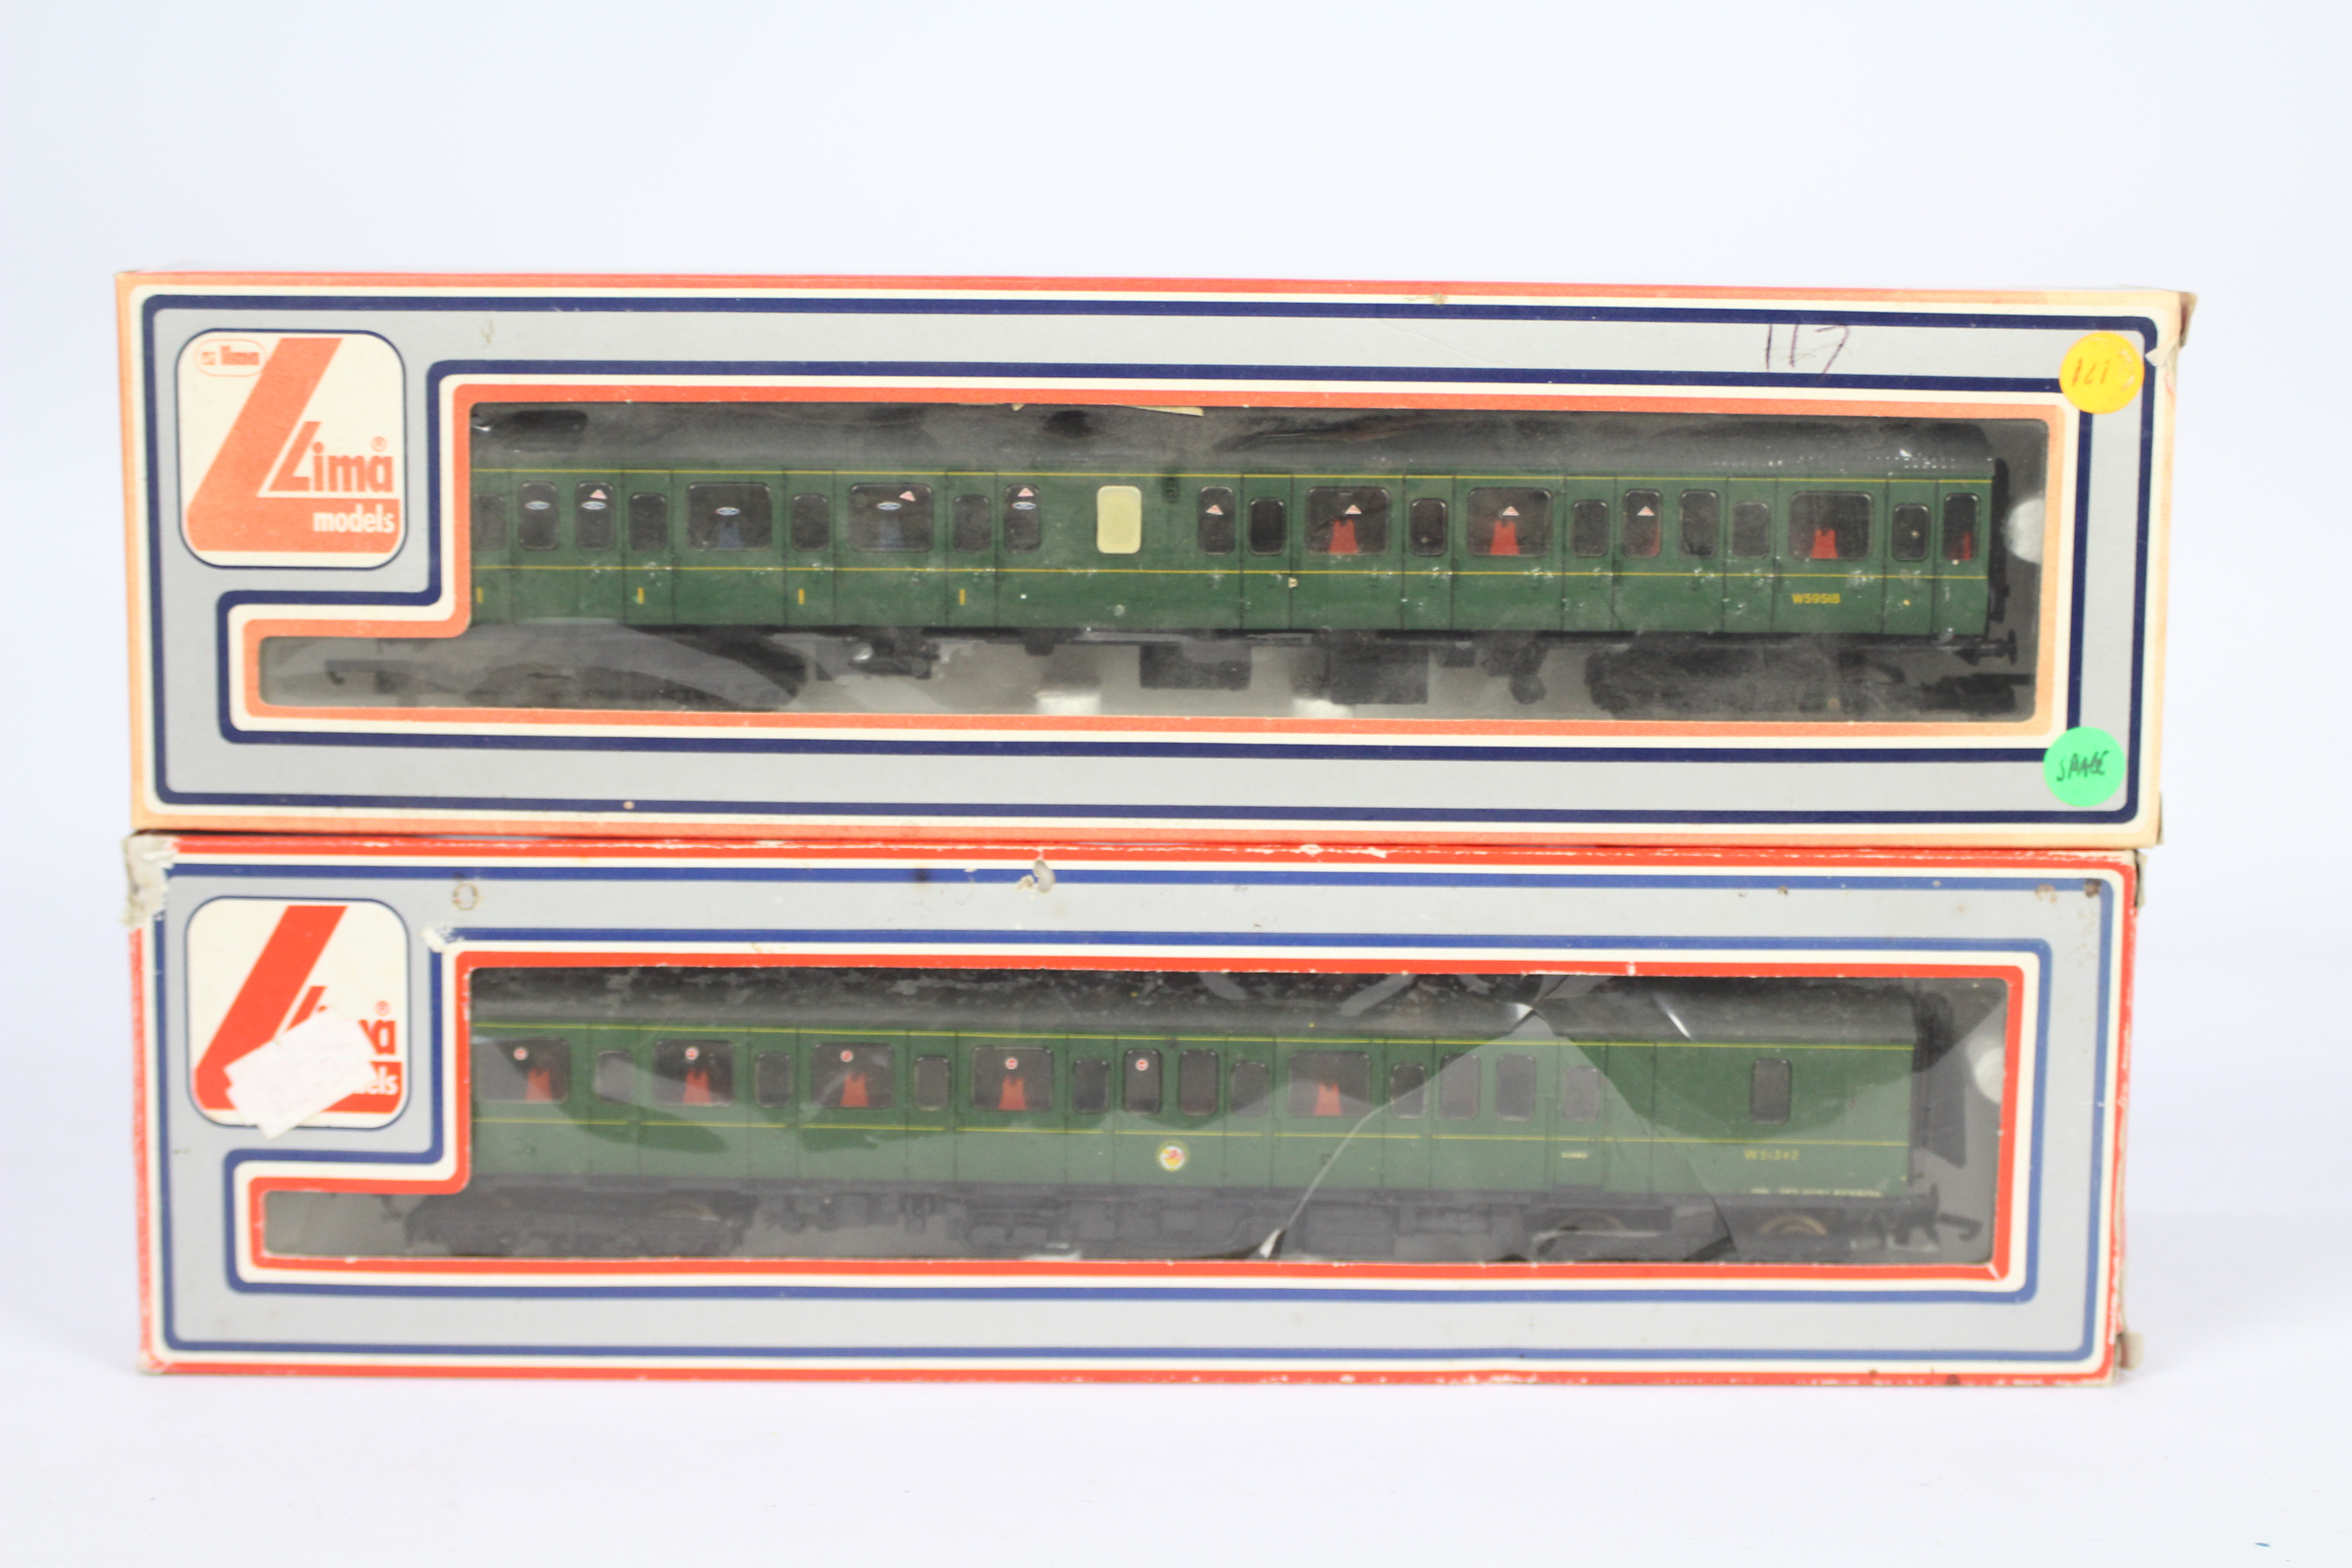 Lima - an OO two-car unit, class 117 diesel electric locomotive, op no W51342 and coach W59518,